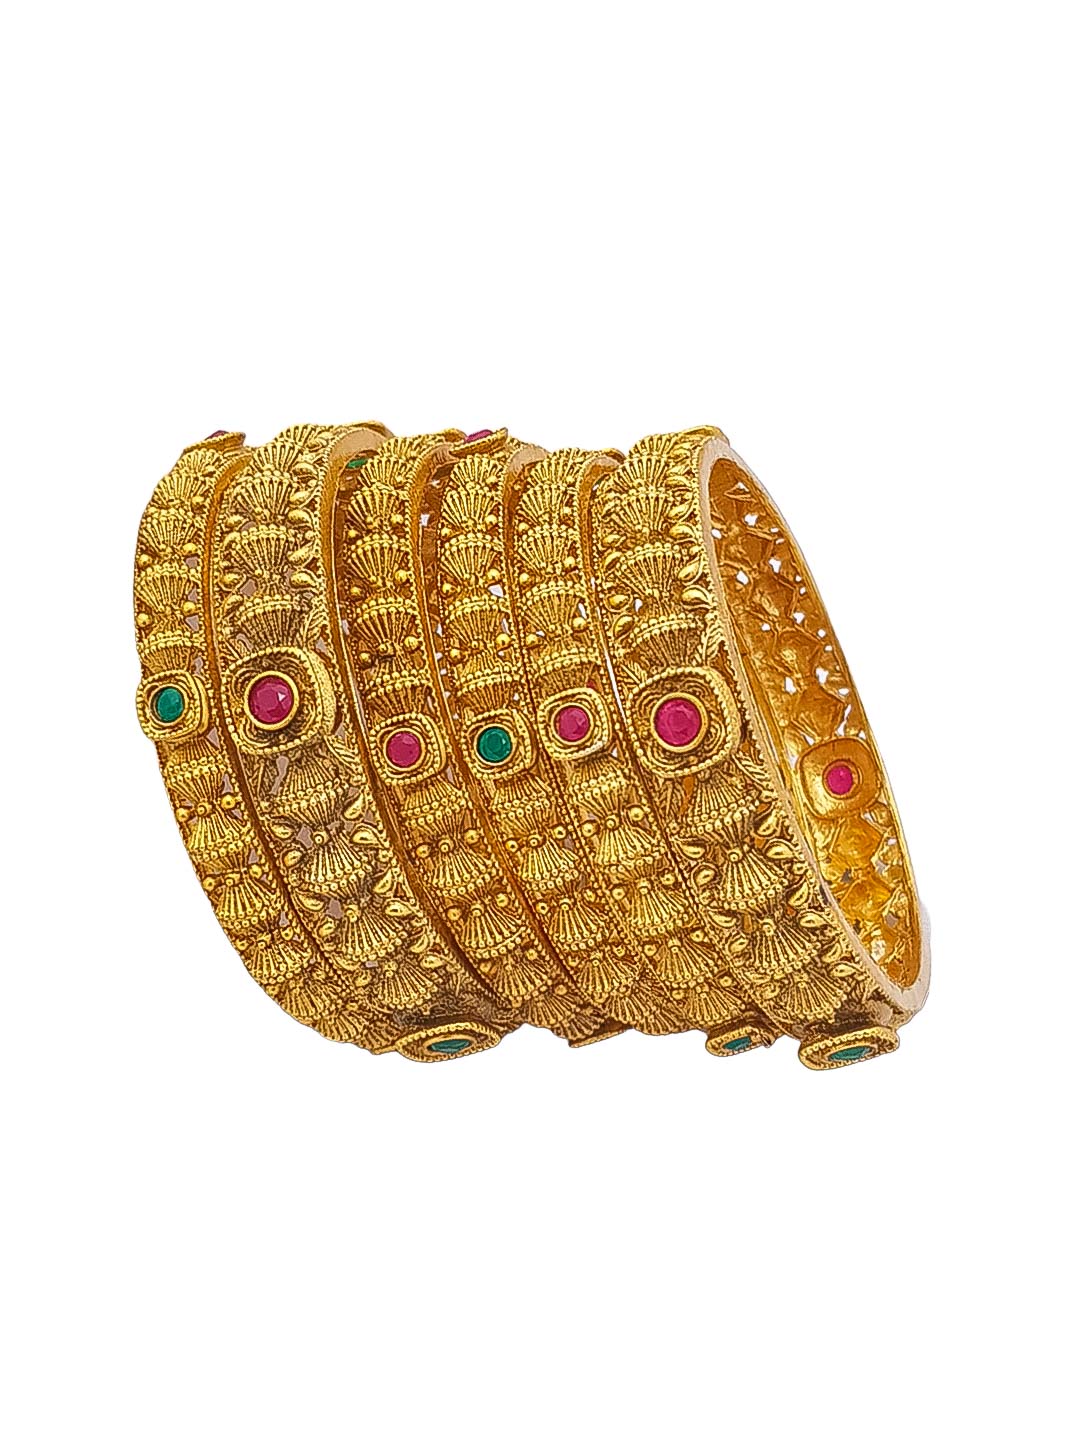 Bangle set of 6 temple collection 17351A